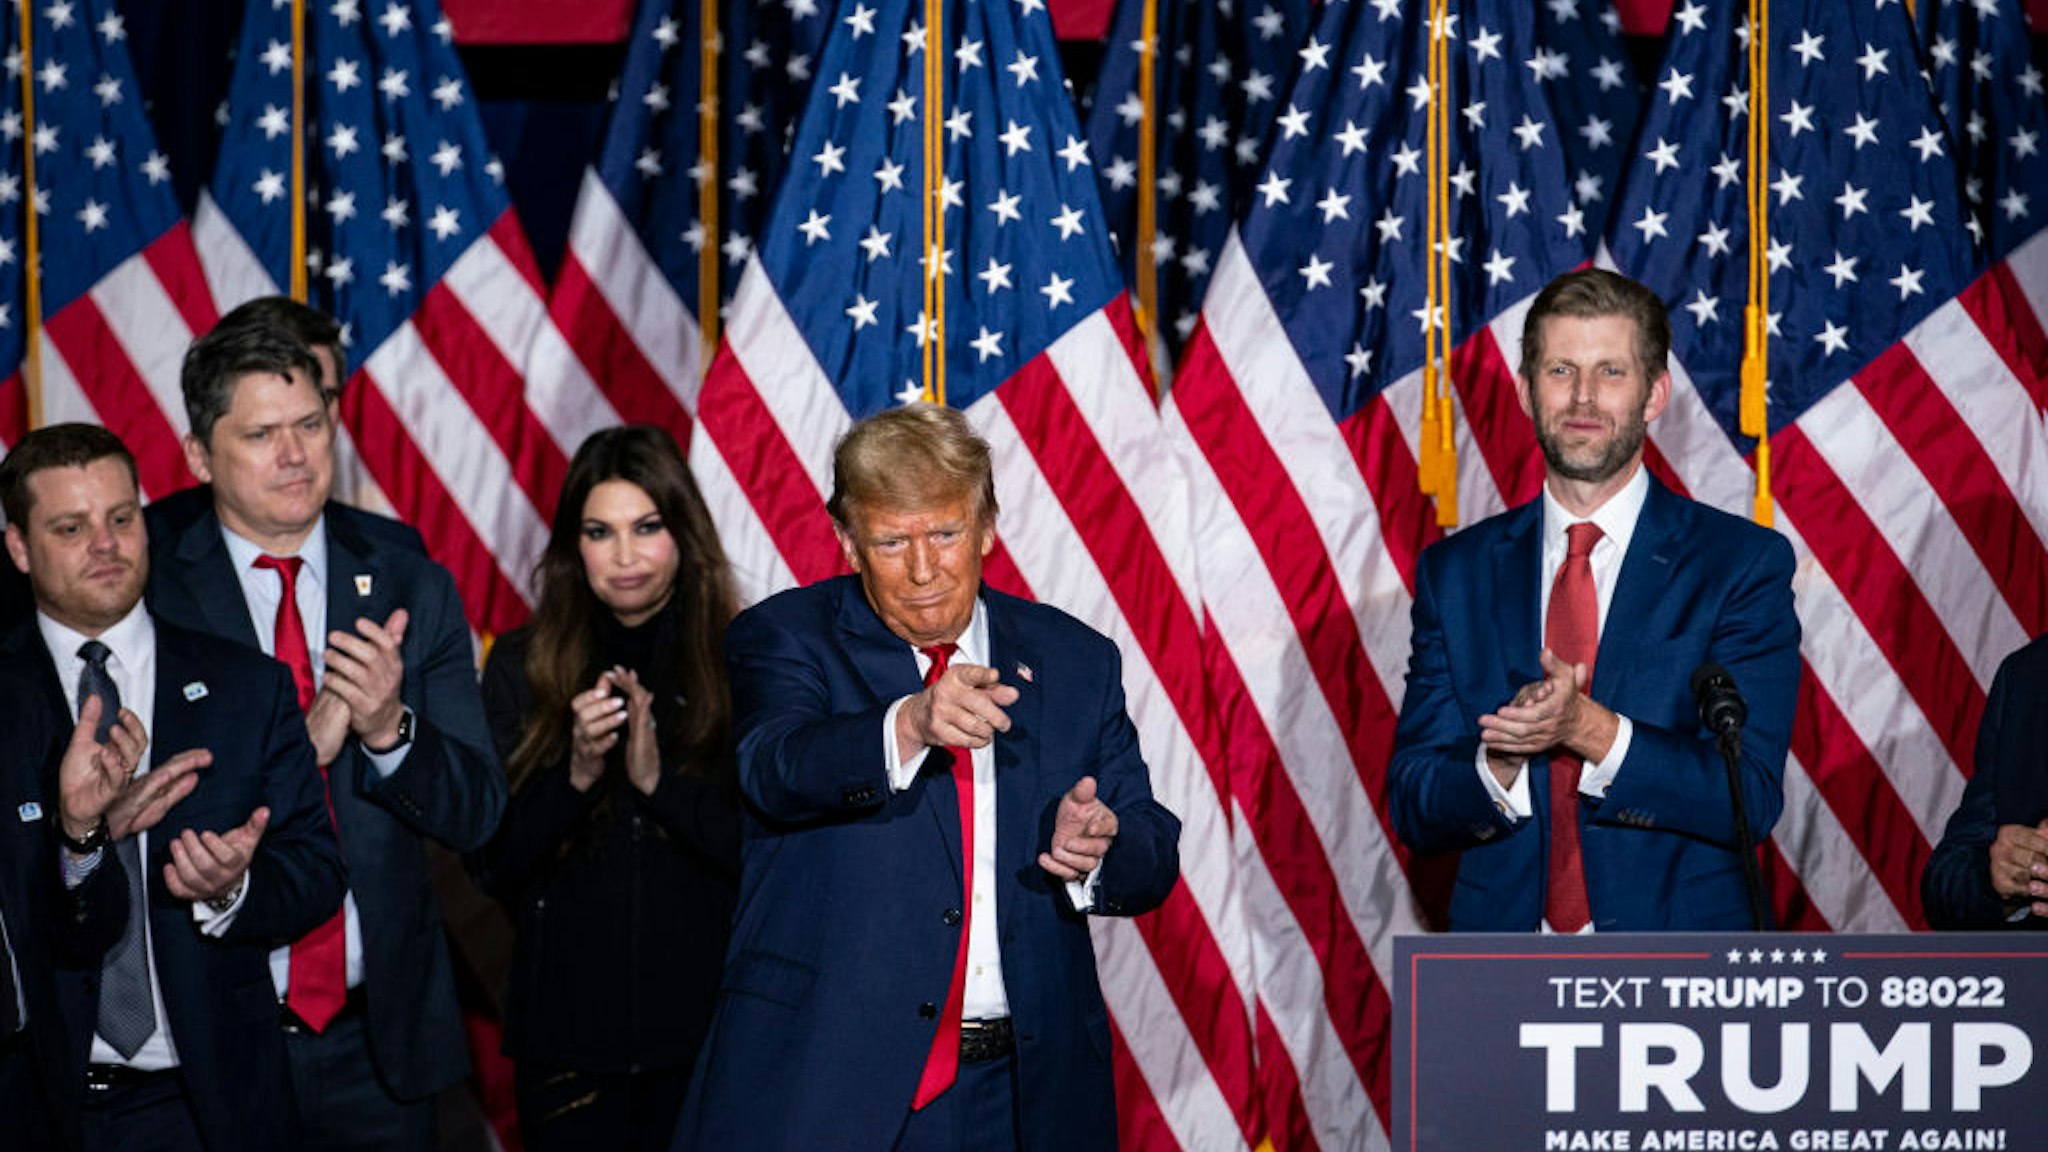 Former US President Donald Trump, second right, departs following a caucus night watch party in Des Moines, Iowa, US, on Monday, Jan. 15, 2024. Trump cruised to victory in the Iowa caucus, warding off a late challenge from rivals Ron DeSantis and Nikki Haley and cementing his status as the clear Republican frontrunner in the race. Photographer: Al Drago/Bloomberg via Getty Images